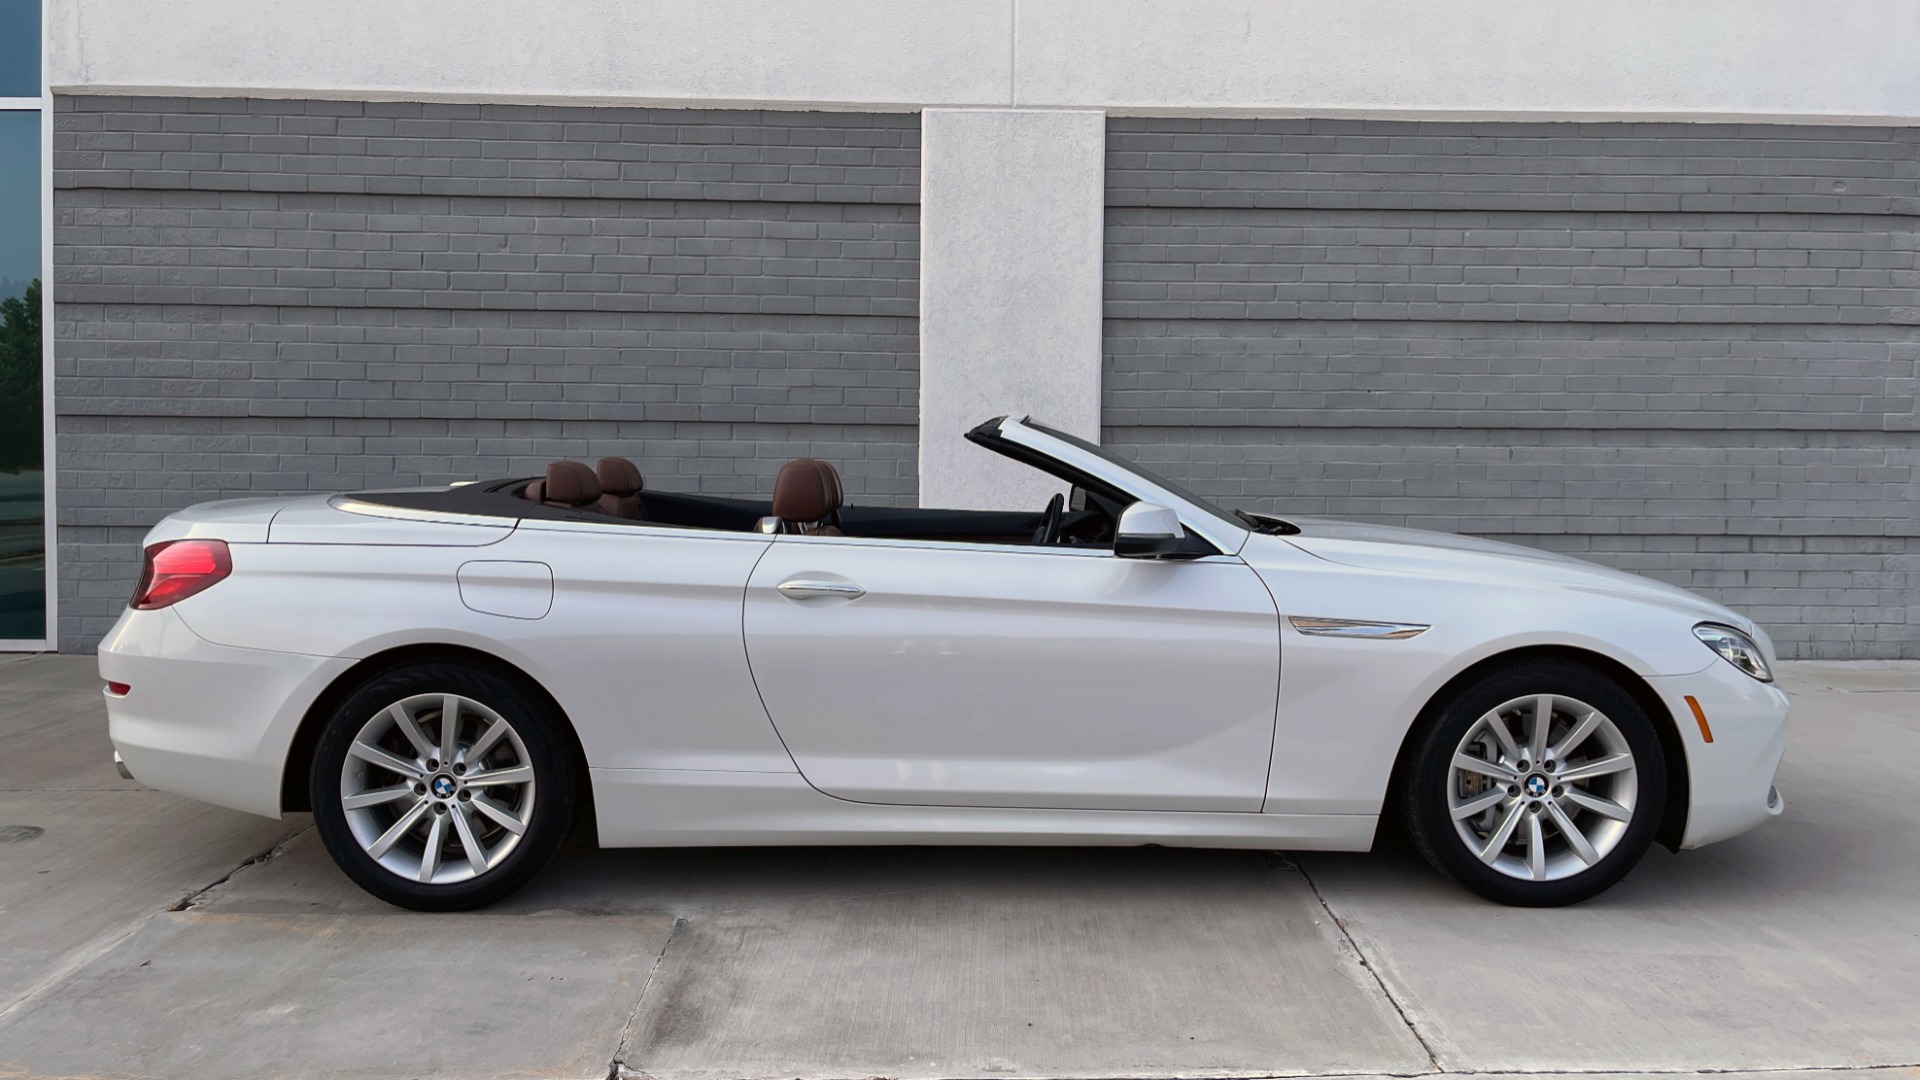 Used 2016 BMW 6 SERIES 640I CONVERTIBLE / 3.0L I6 / 8-SPD AUTO / RWD / NAV / REARVIEW for sale Sold at Formula Imports in Charlotte NC 28227 4